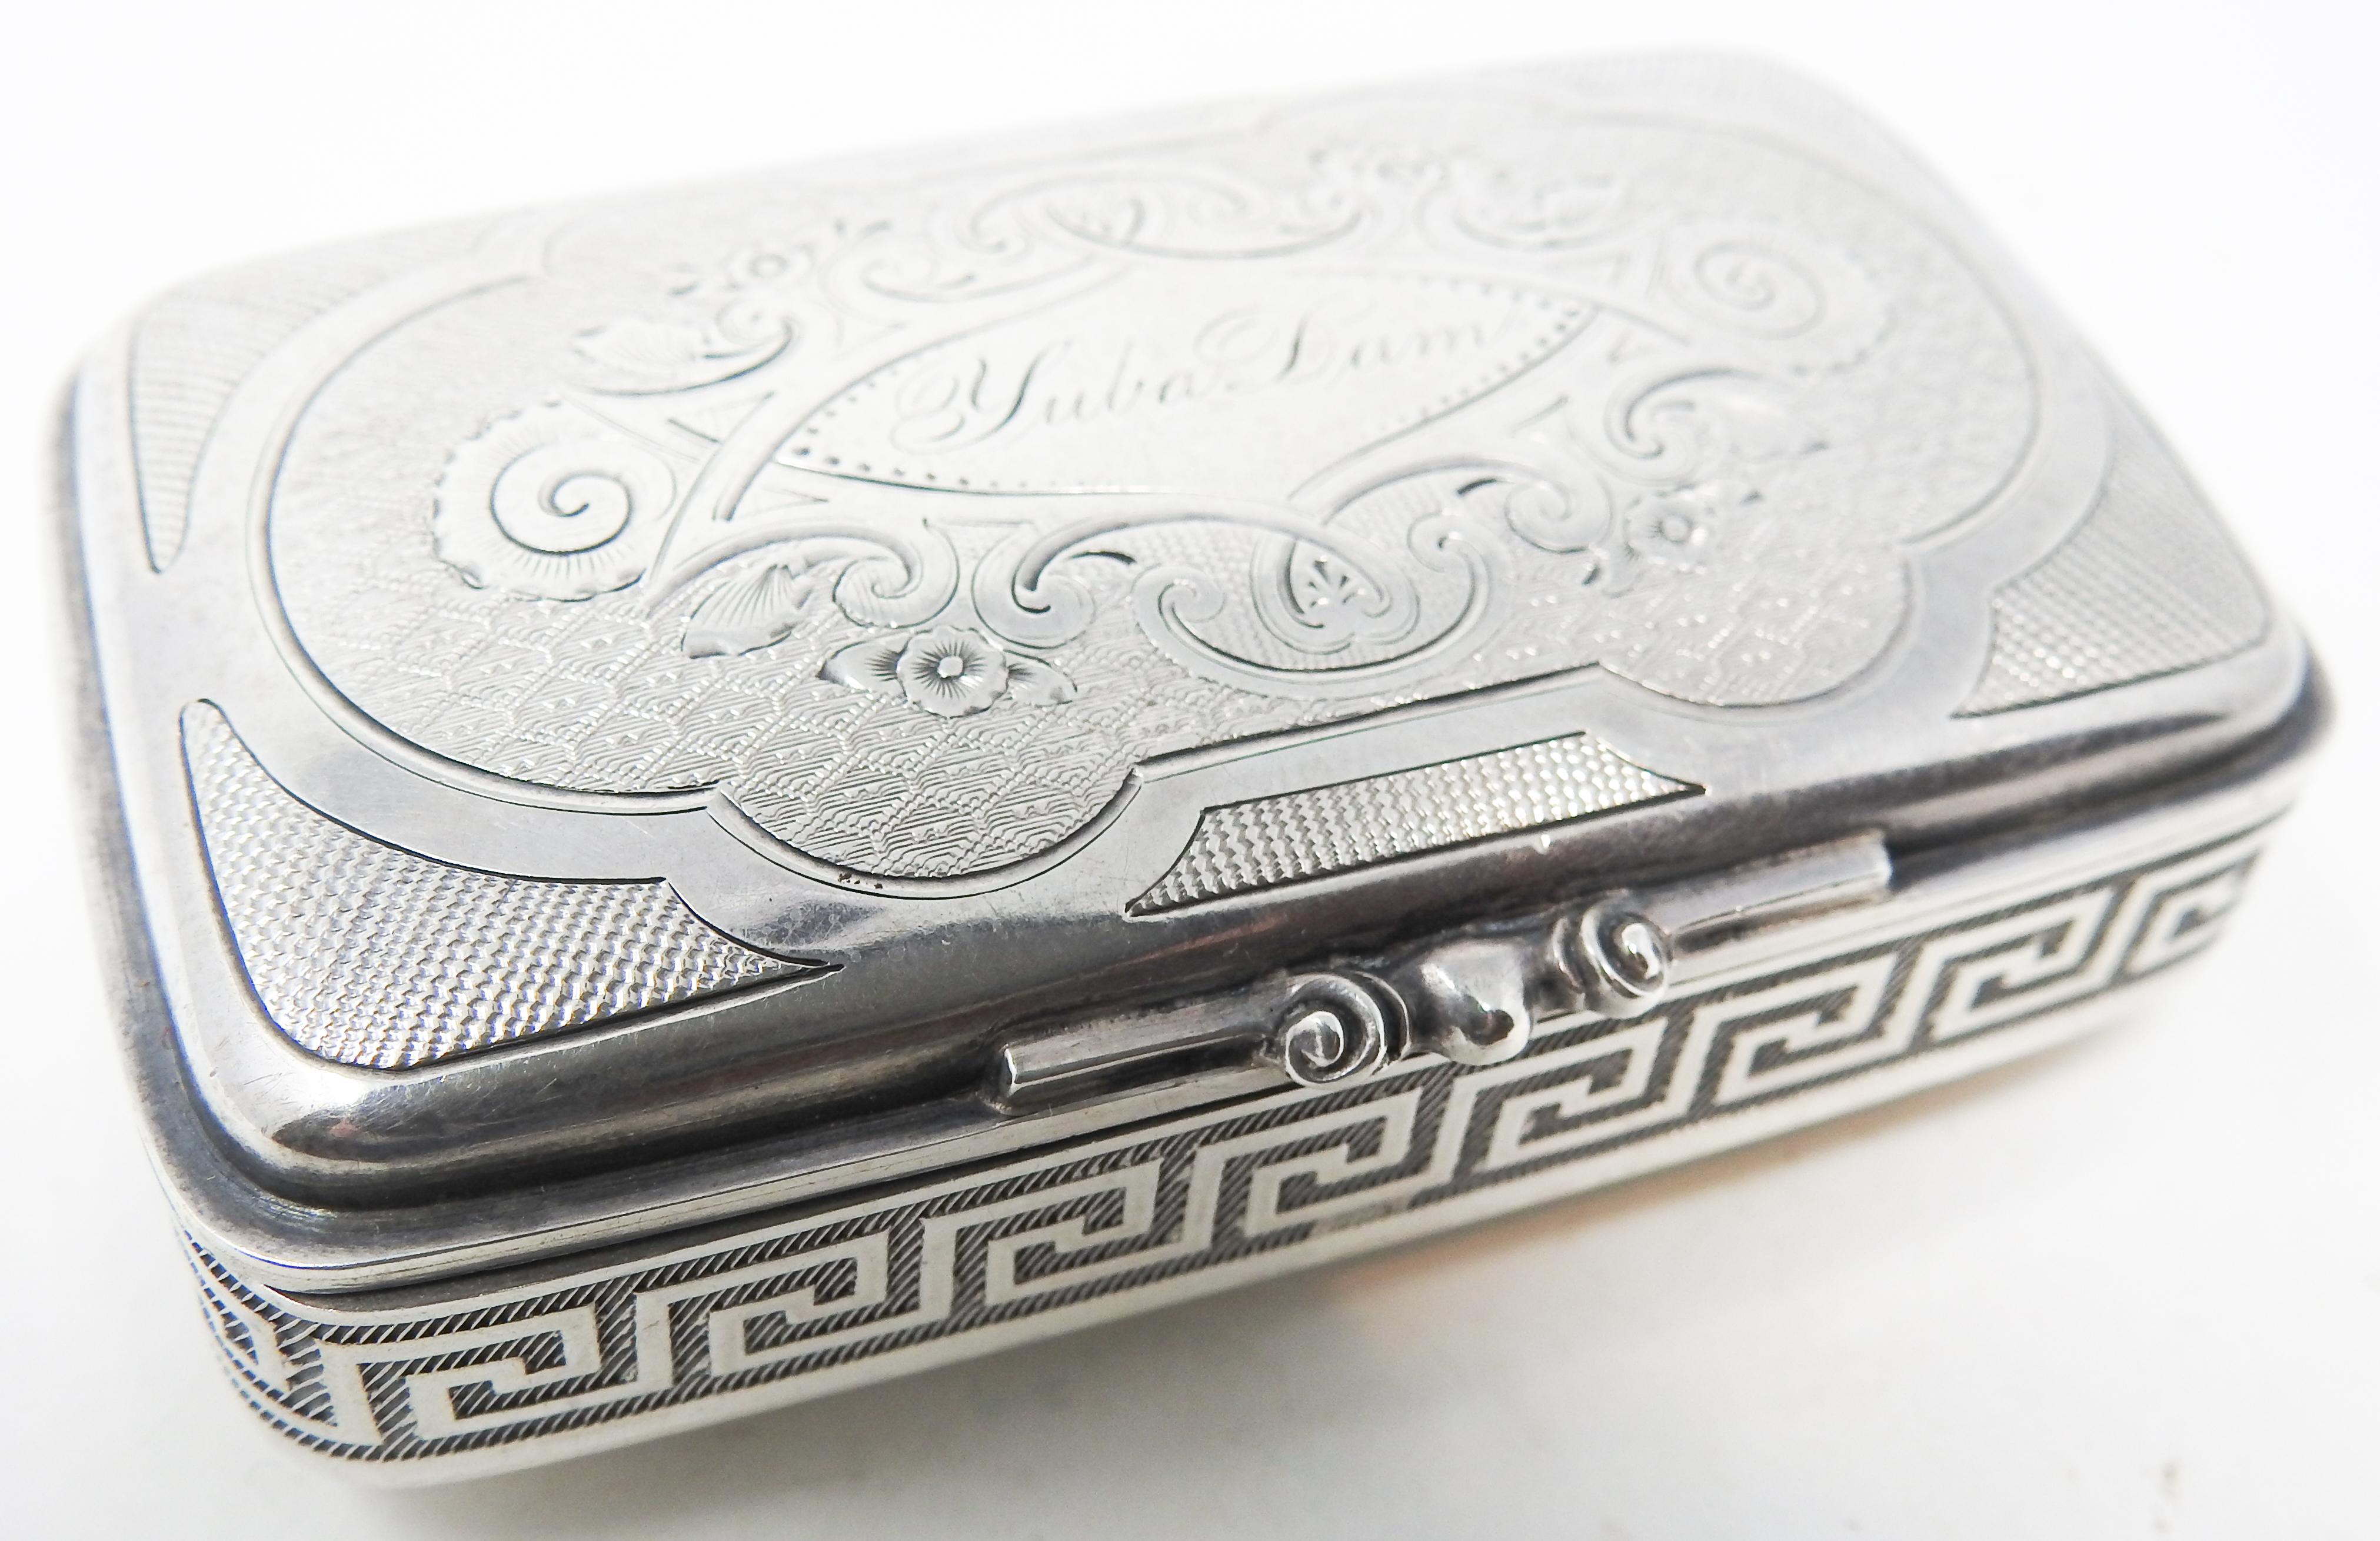 Offering this gorgeous sterling silver case with Greek key band. The top has floral, foliate, and scrollwork engraved filigree and geometric patterns. The center has an eye shape with Yuba Dam engraved. The latch is a squeeze latch and is a